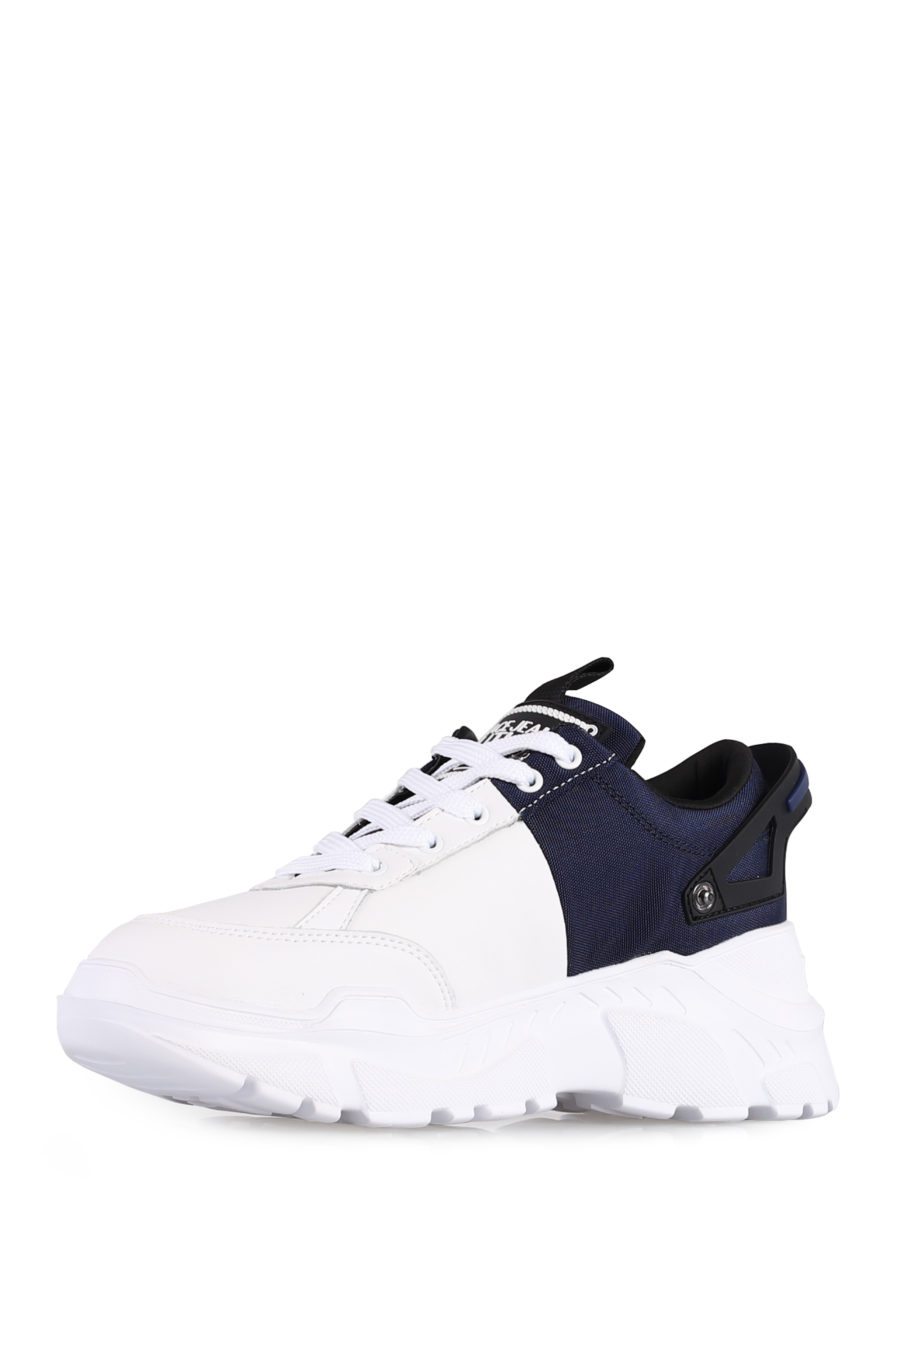 Shoes "Speedtrack" in white and blue - IMG 1047